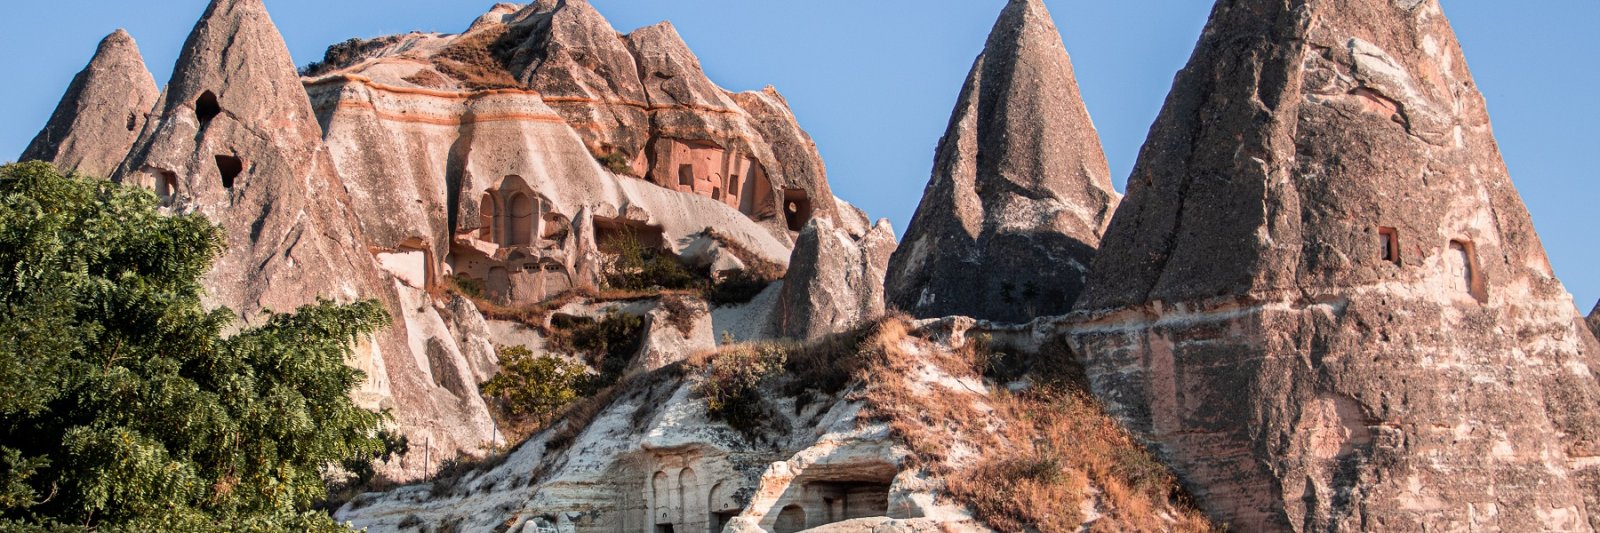 dwellings carved into mountains